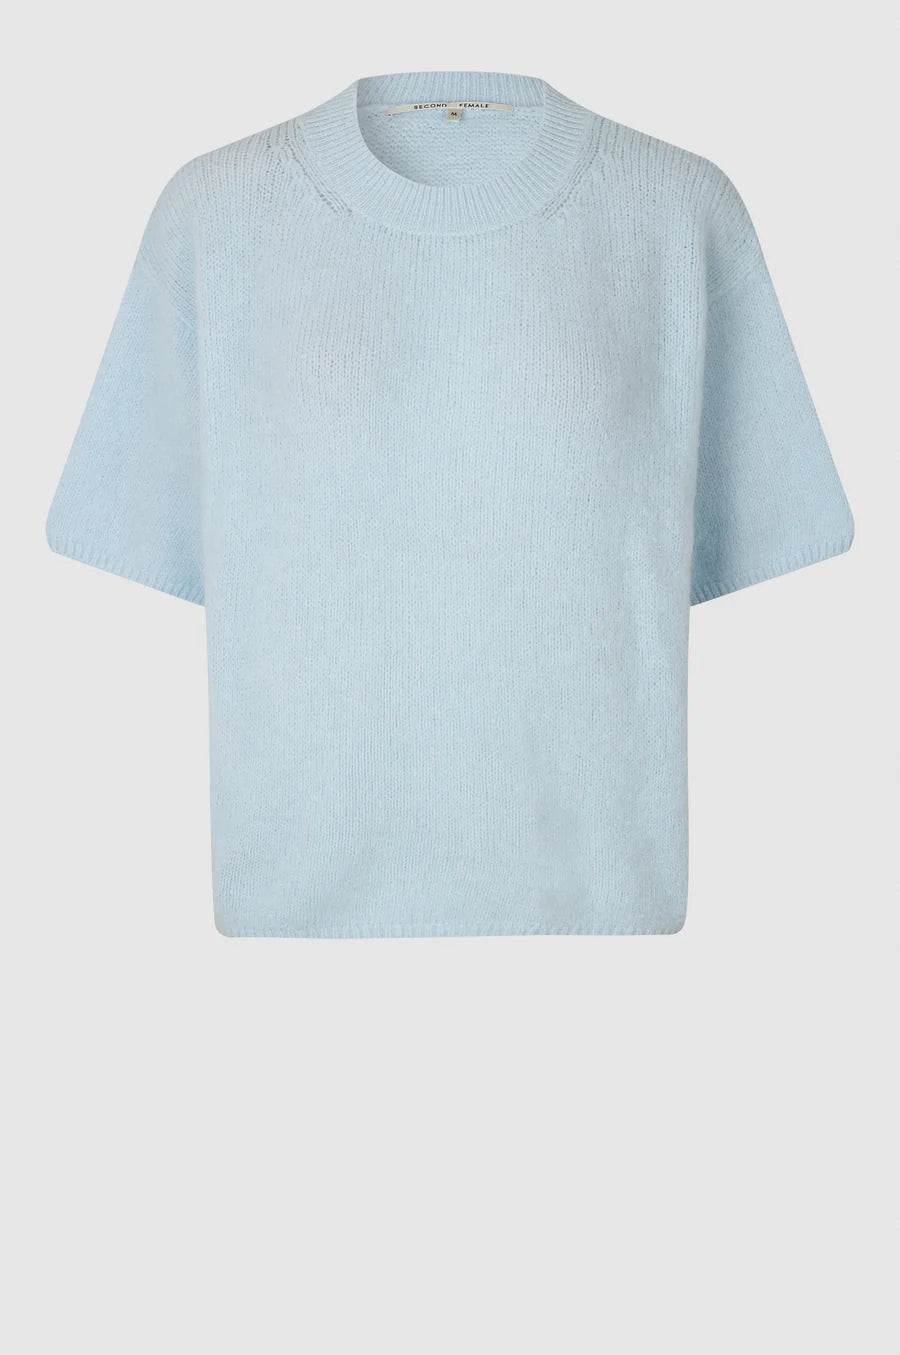 Baby blue short sleeved knitted jumper with crew neck